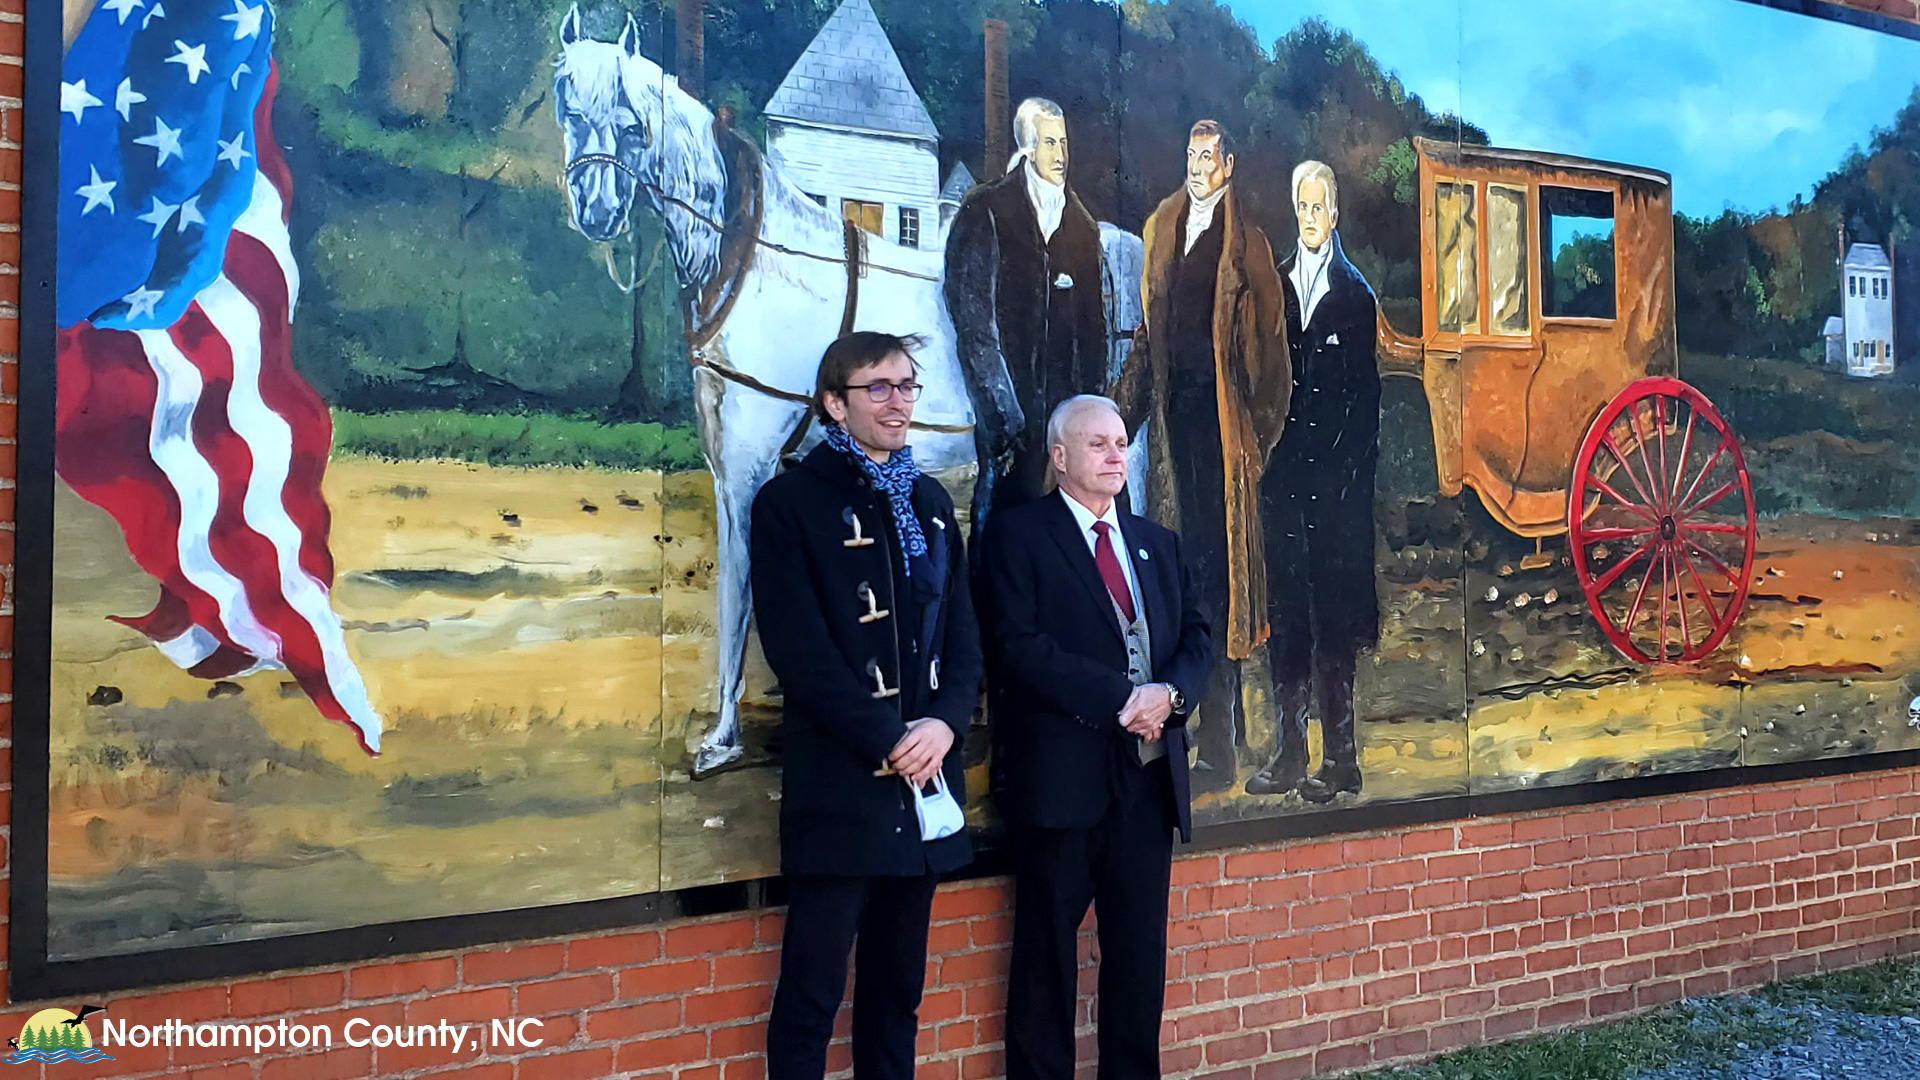 Mural commemorating Lafayette's visit on the west wall of the Embassy Cafe in Jackson NC